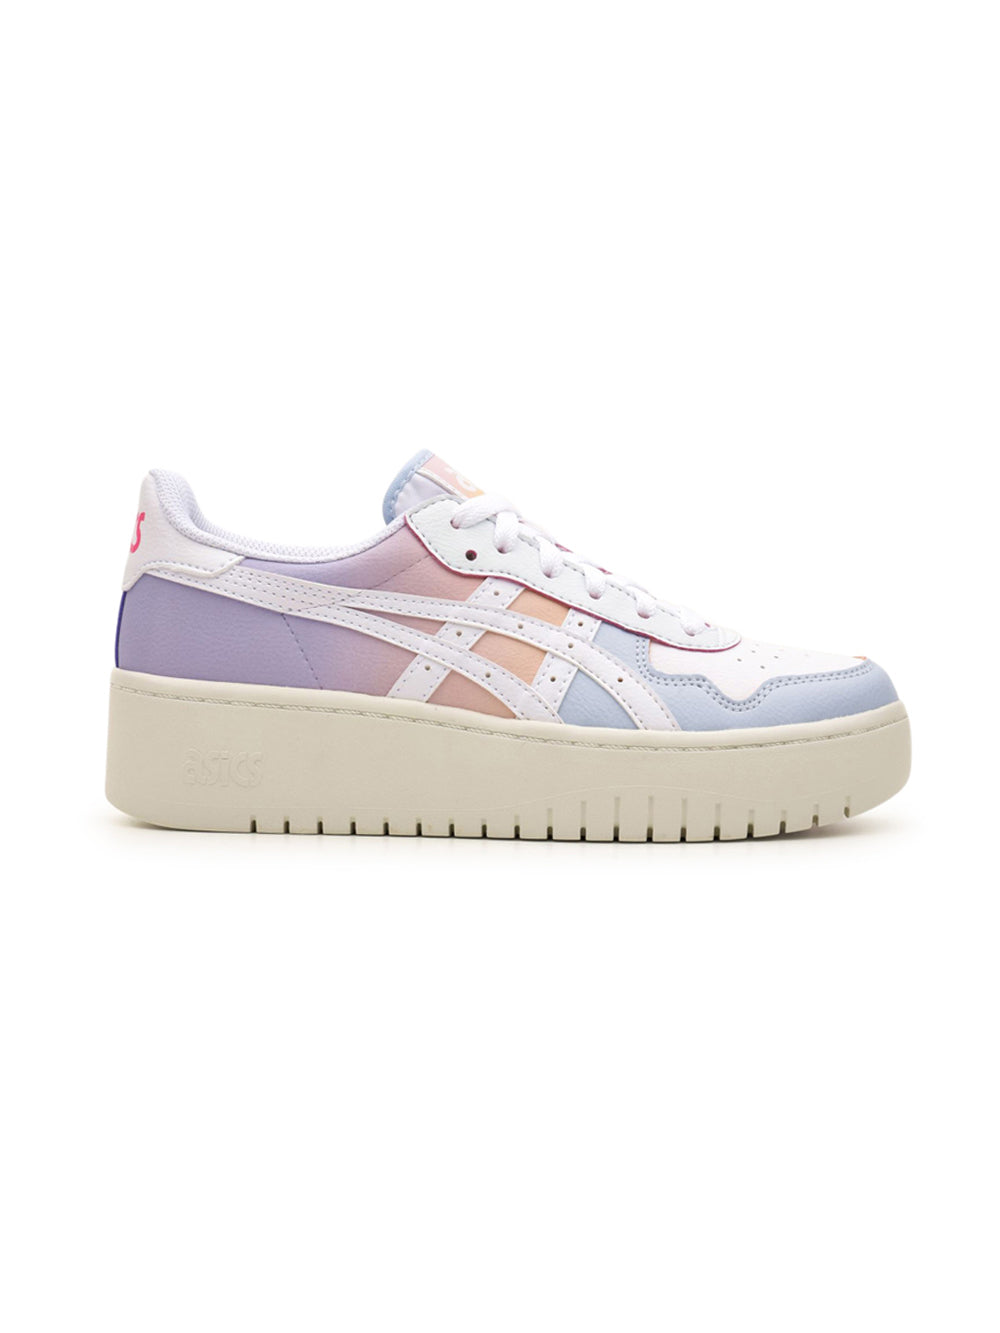 Sneakers Basse ASICS Donna 1202A479 JAPAN S PF